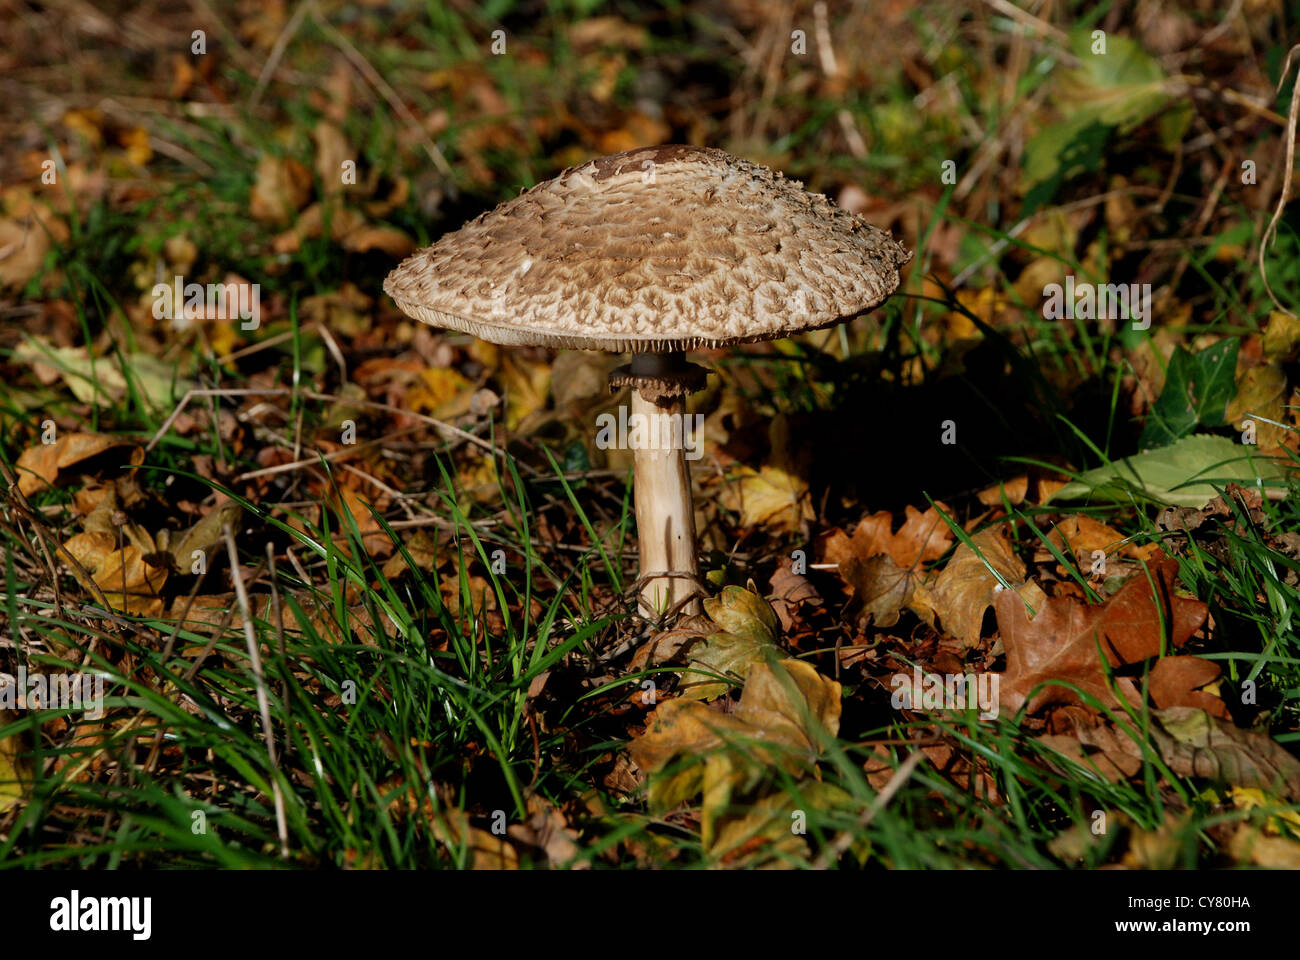 Large mushroom surrounded by grass and autumn leaves Stock Photo